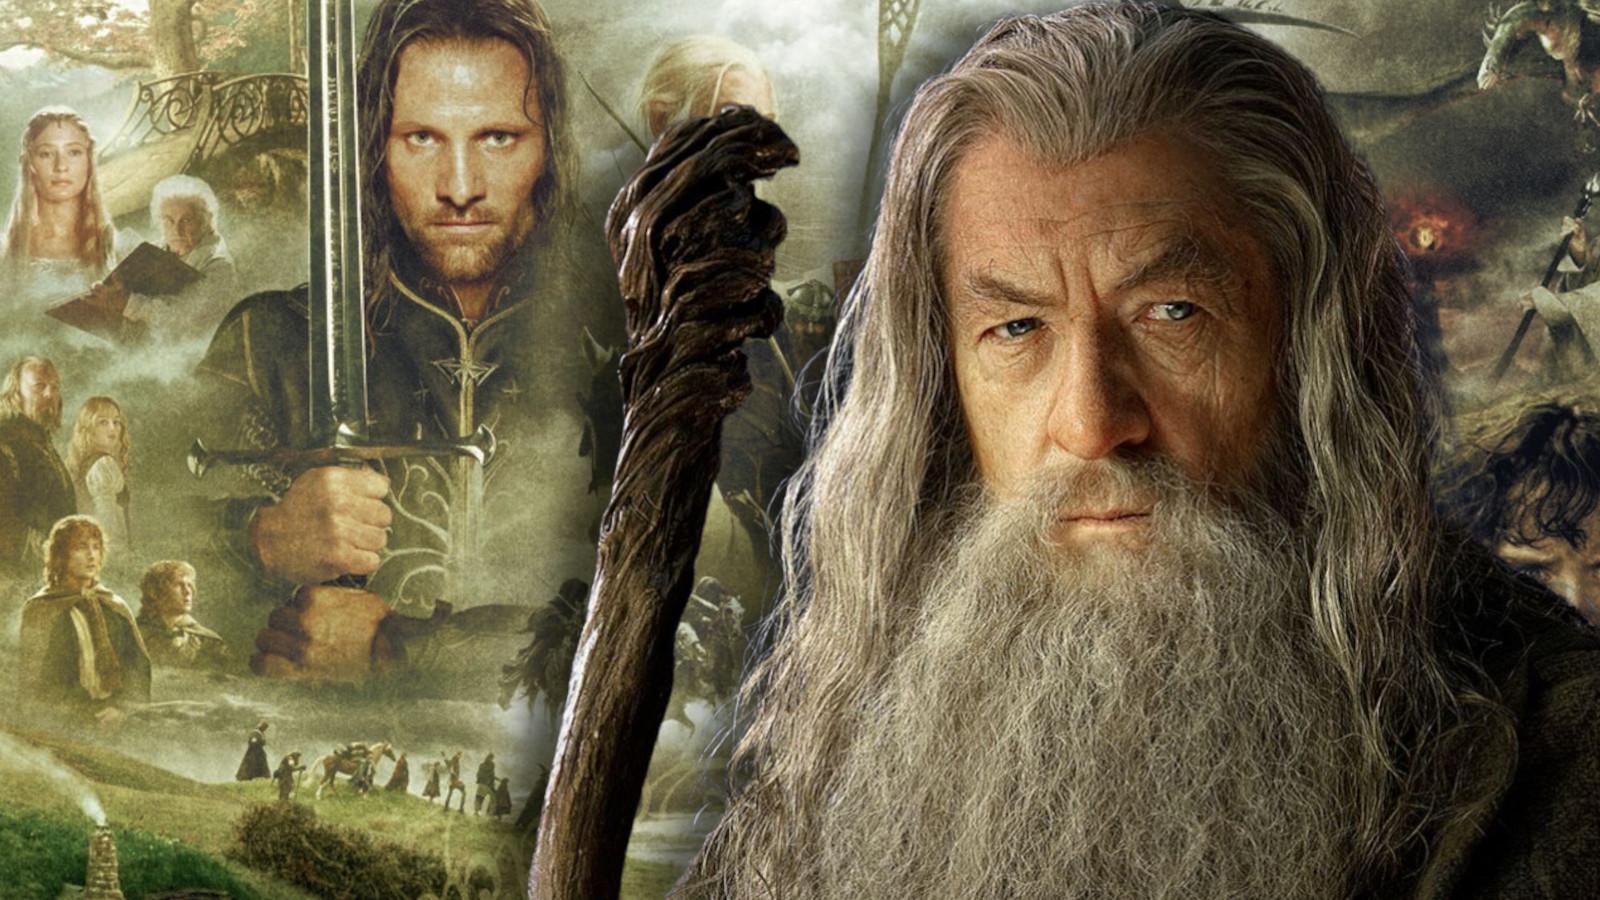 Gandalf the grey wth the Lord of the Rings cast in the background.